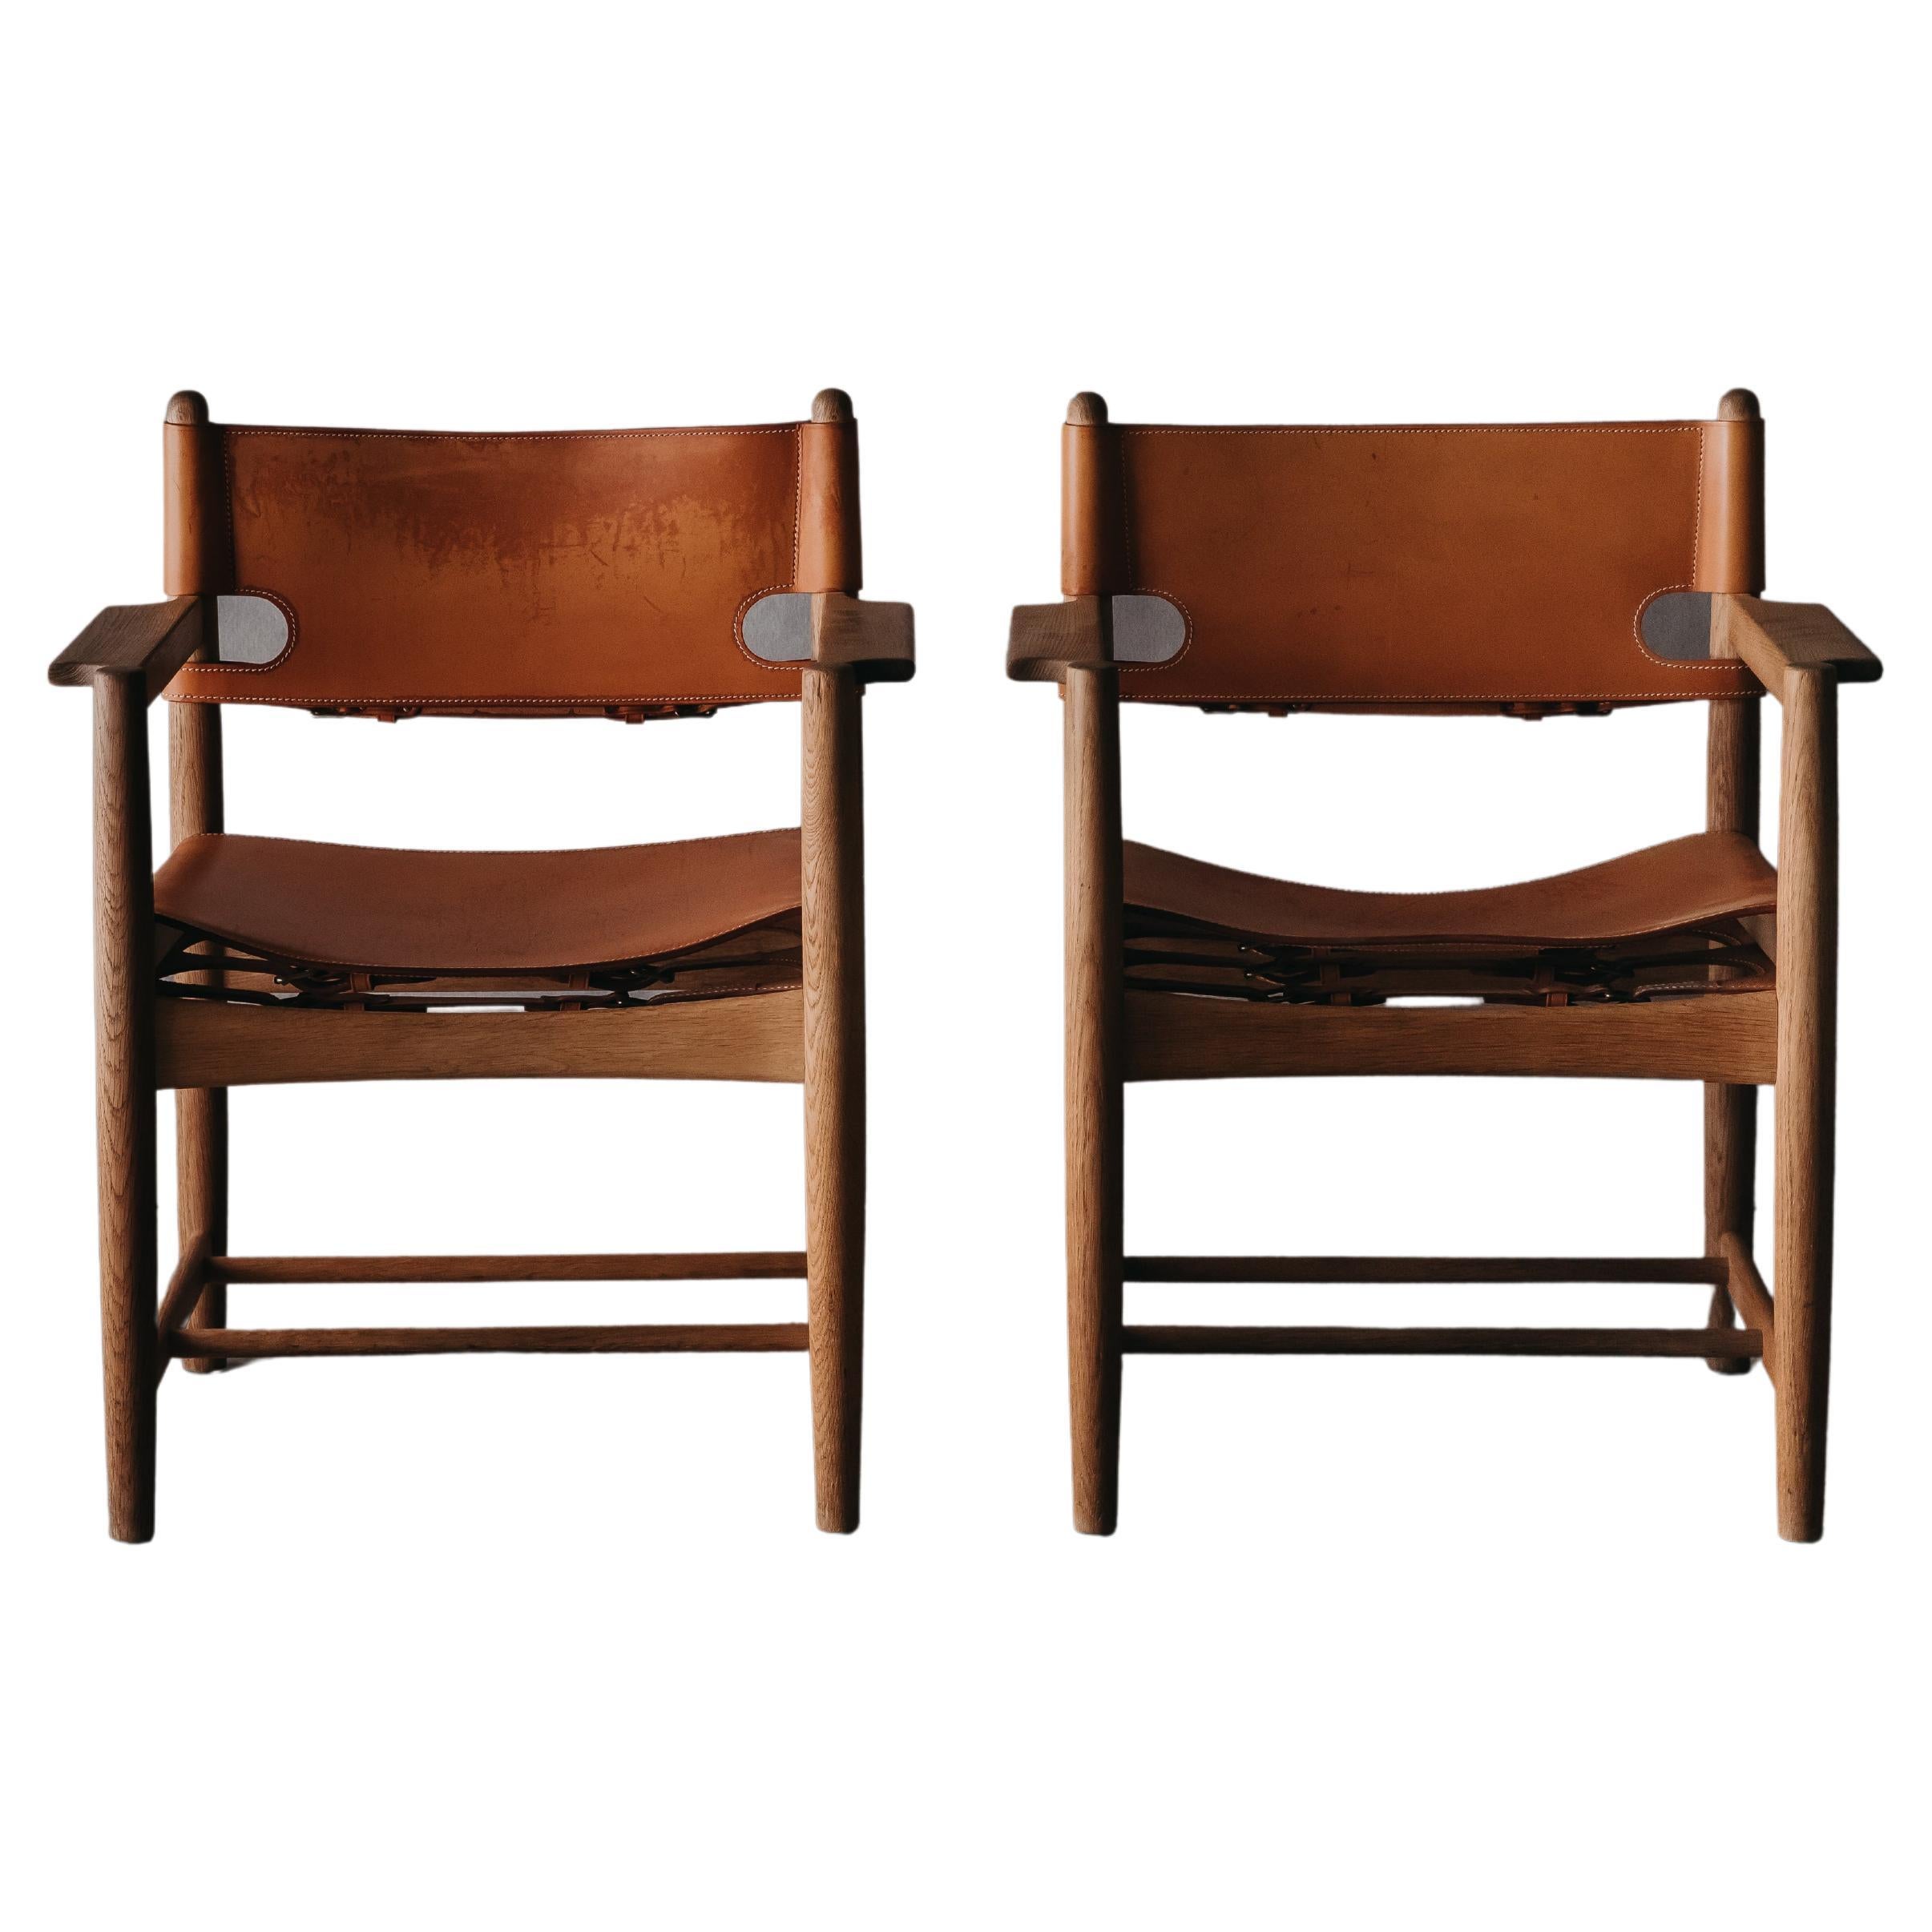 Vintage Pair of Borge Mogensen Dining Chairs from Denmark, circa 1970